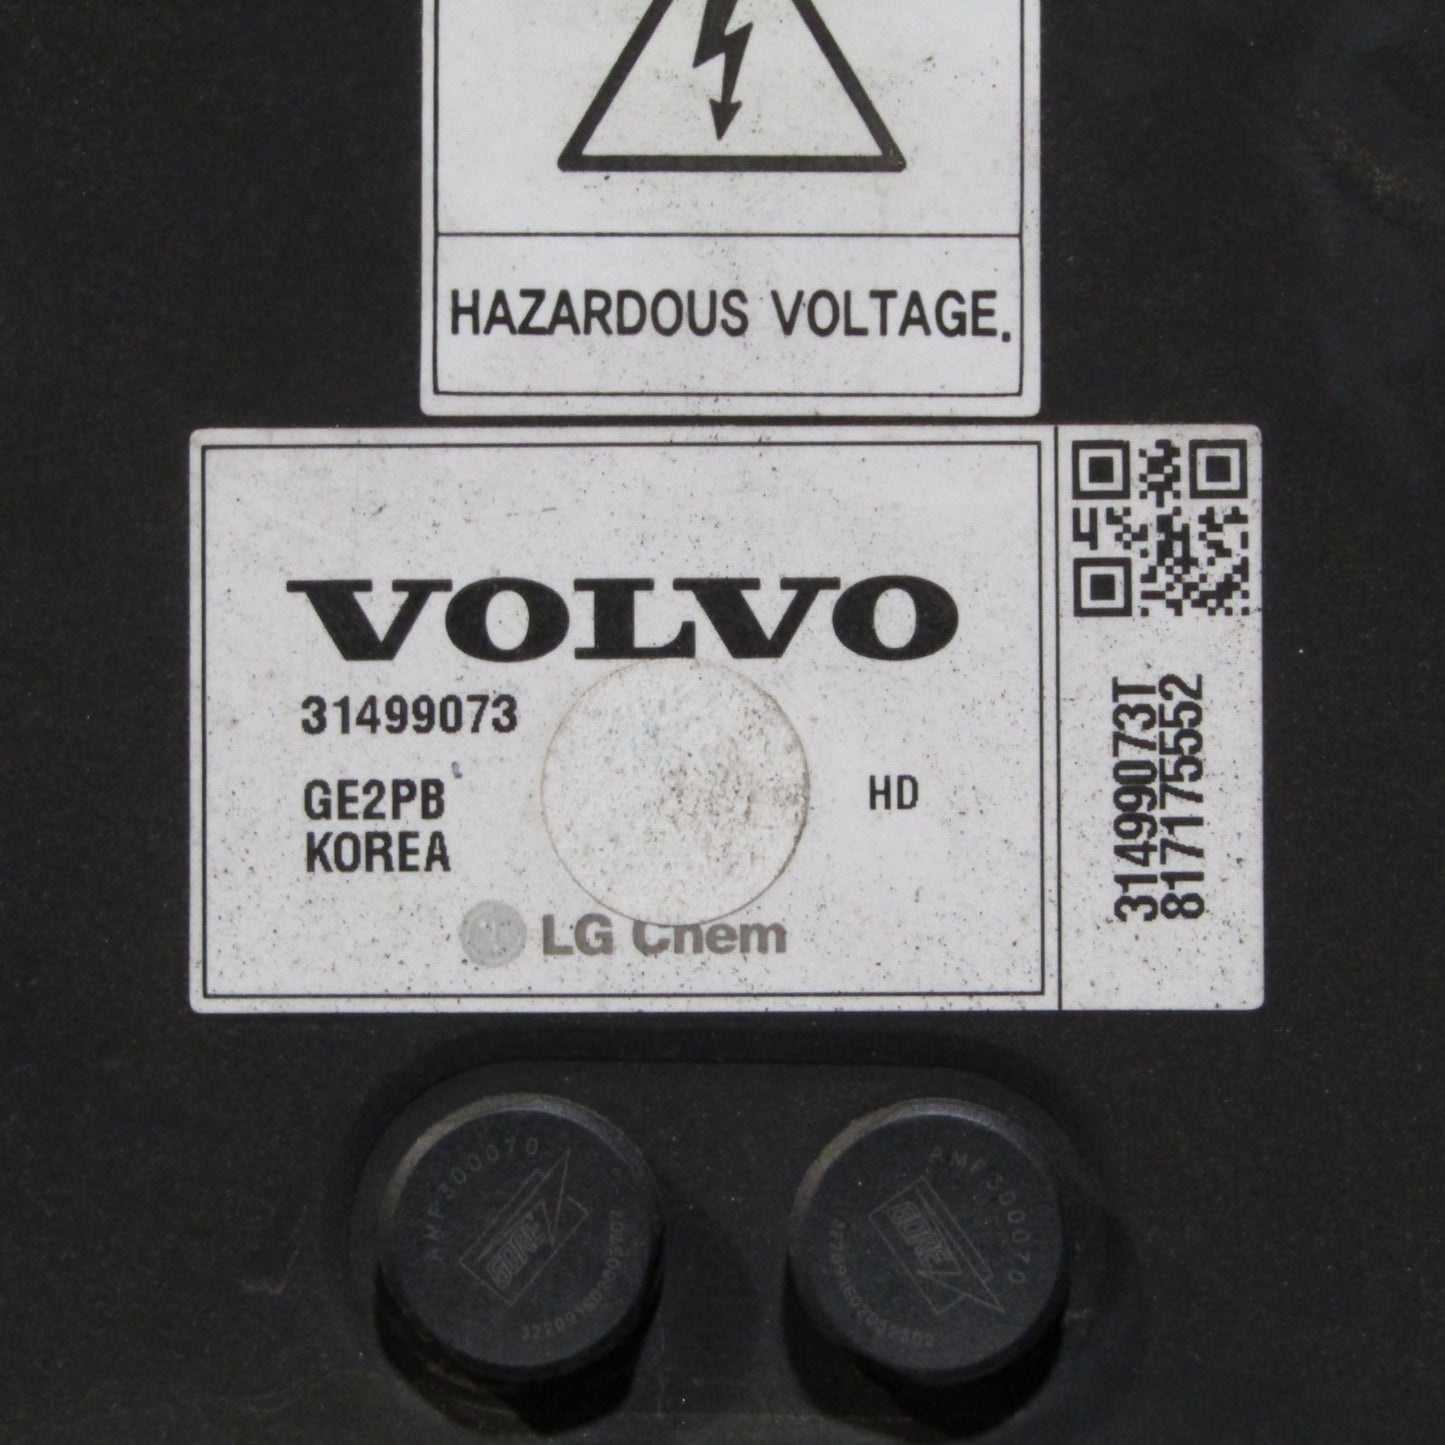 Volvo XC90 / 18.8 kWh / Battery Pack - order of 10x